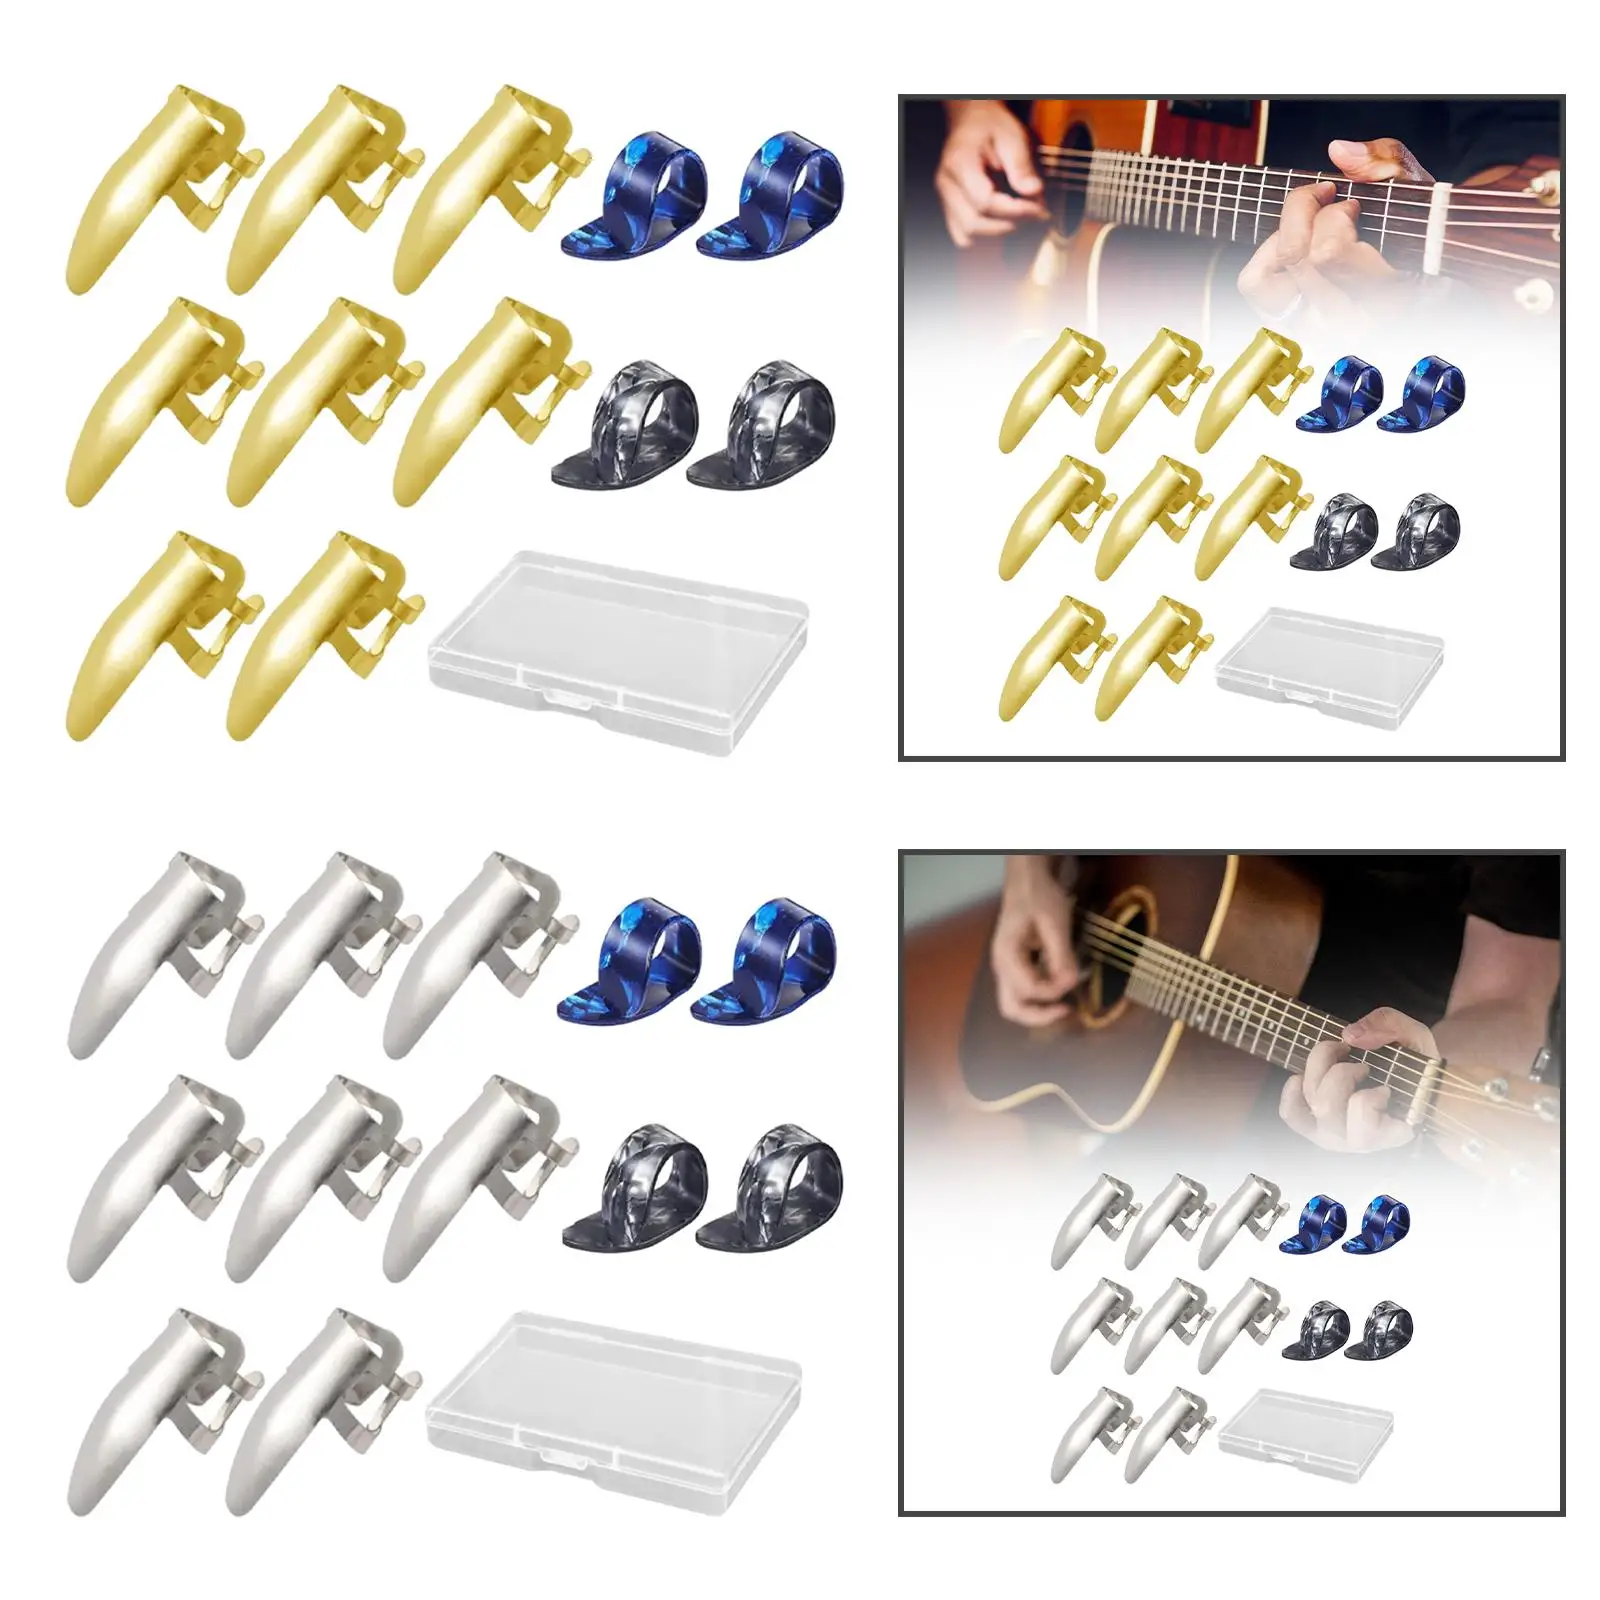 Stainless Steel Finger Picks and Thumb Picks Music Instrument Parts Replacement Parts Guitar Accessories Metal Finger Picks